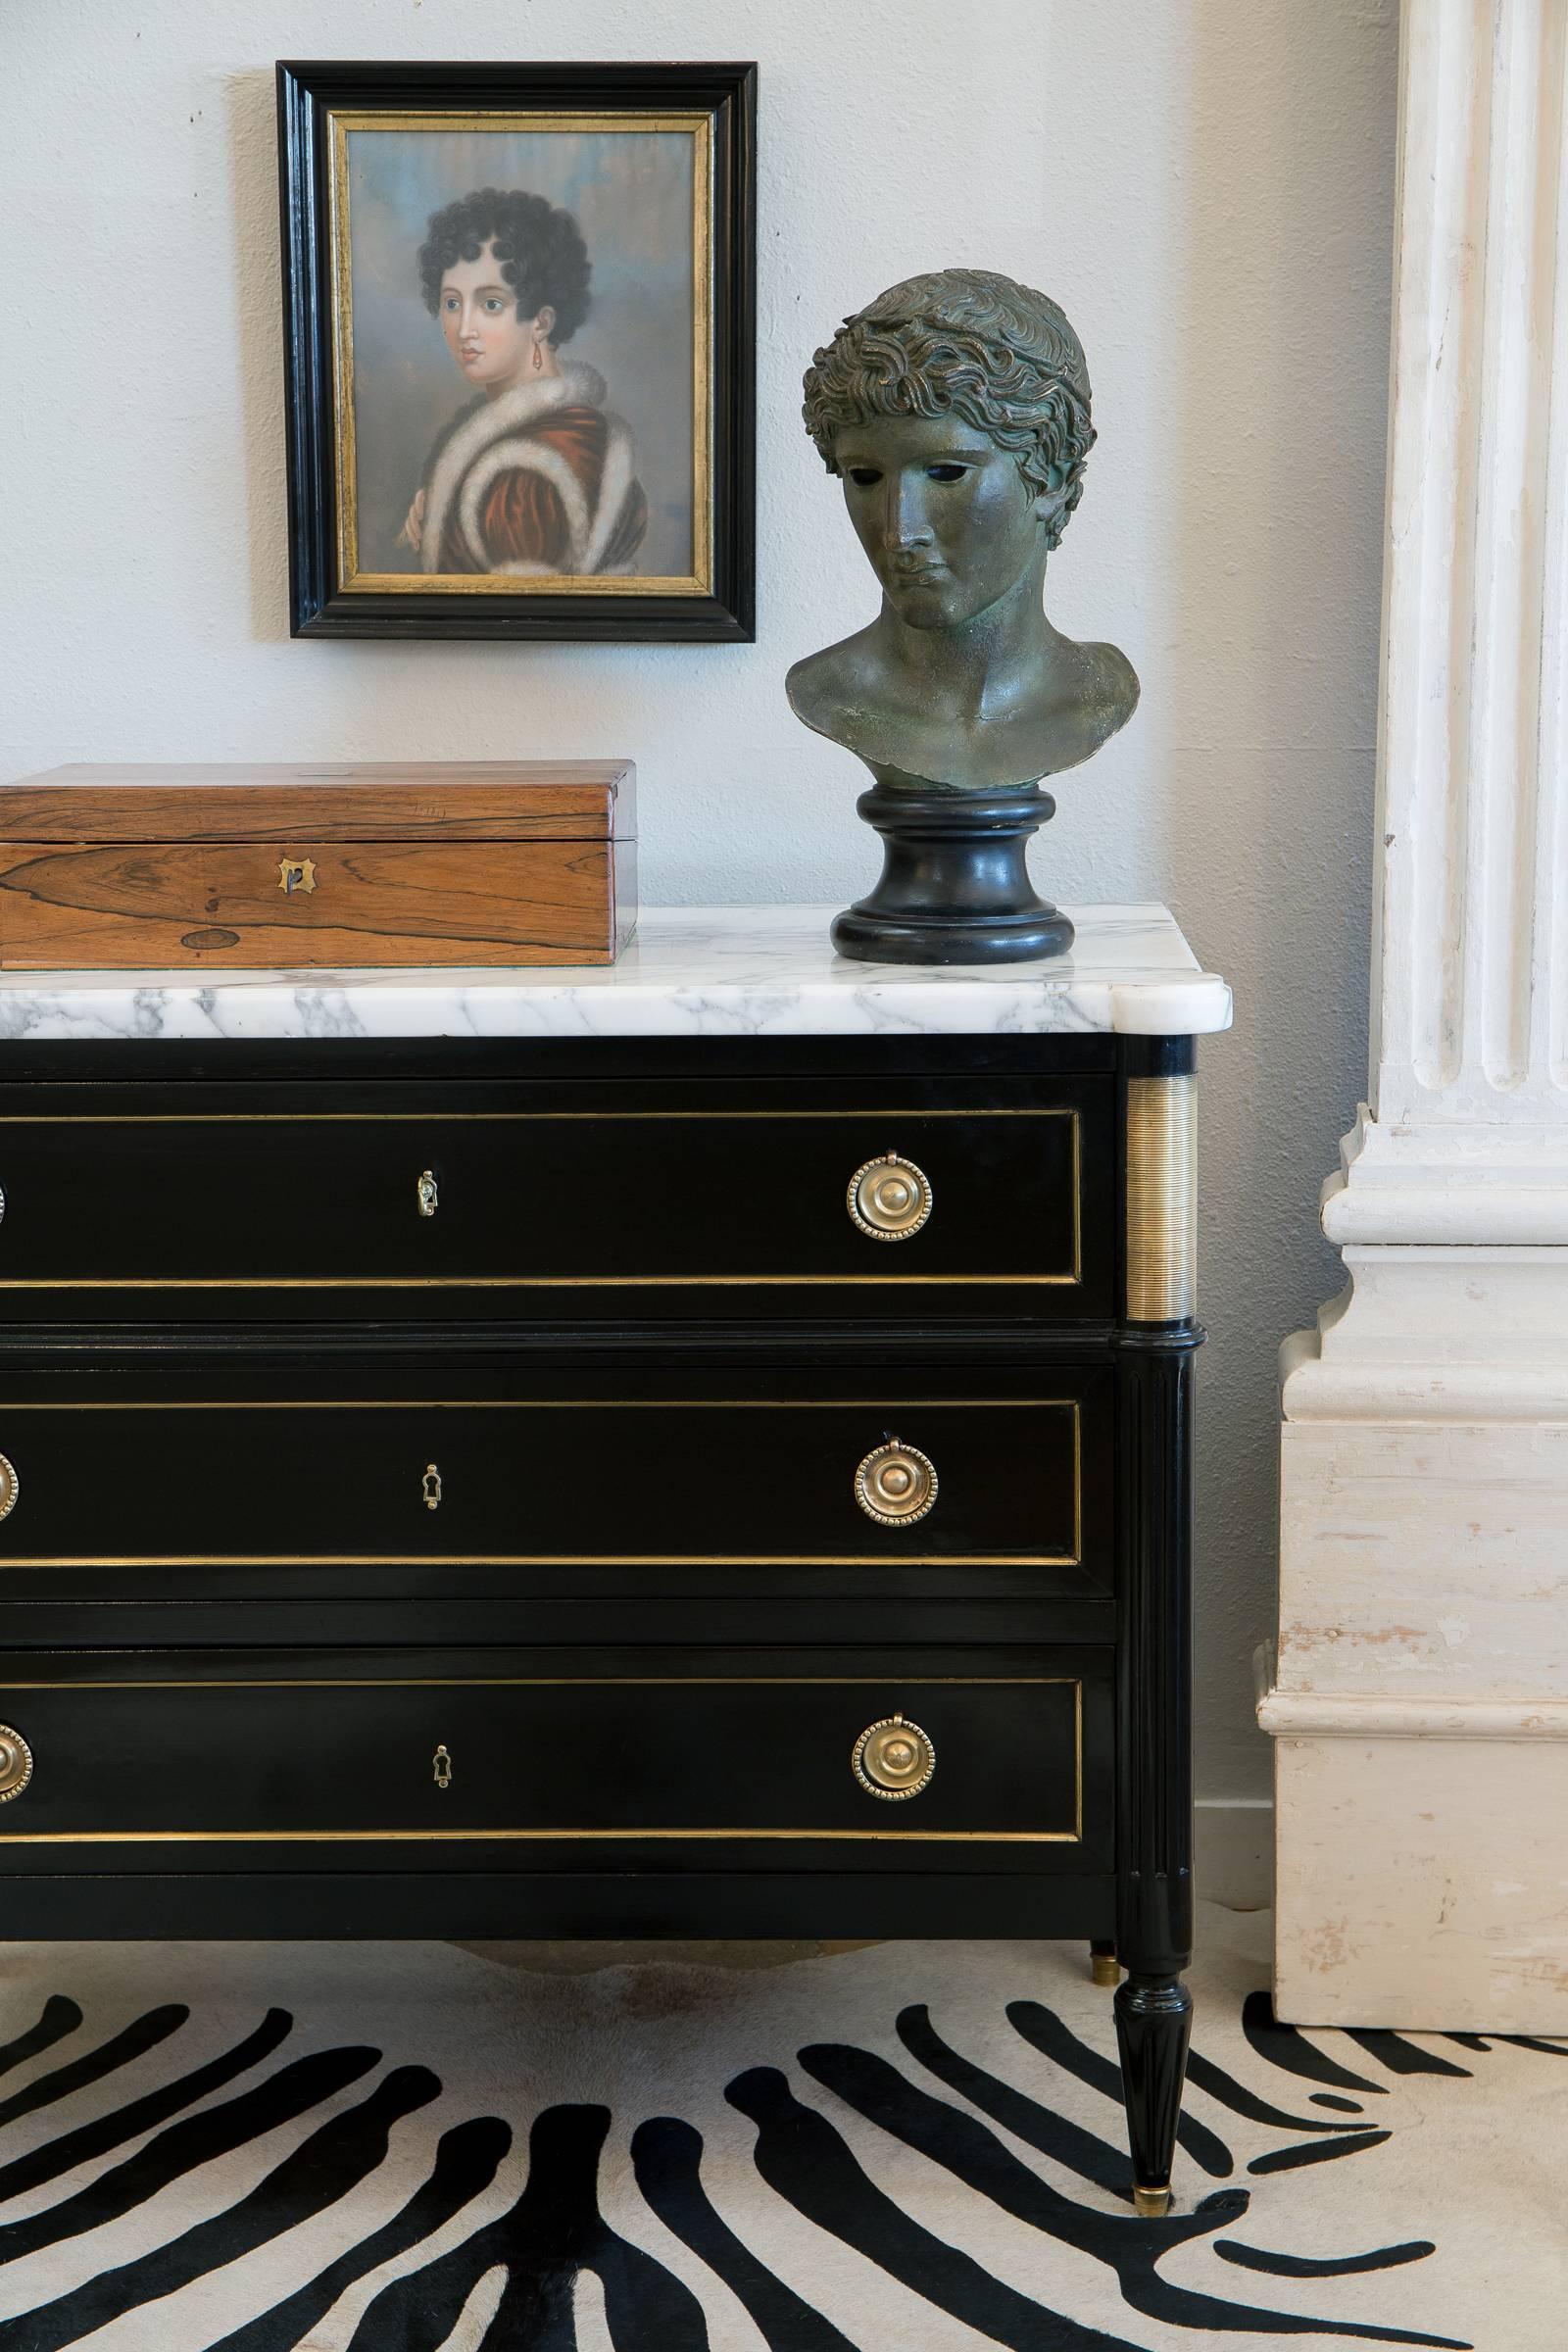 A high quality solid mahogany chest of drawers in the Louis XVI style with a thick Carrara marble slab. Gilt trim throughout and finely cast decorative hardware. The perfect sleek neoclassic chest for you r entry way or bedside table.